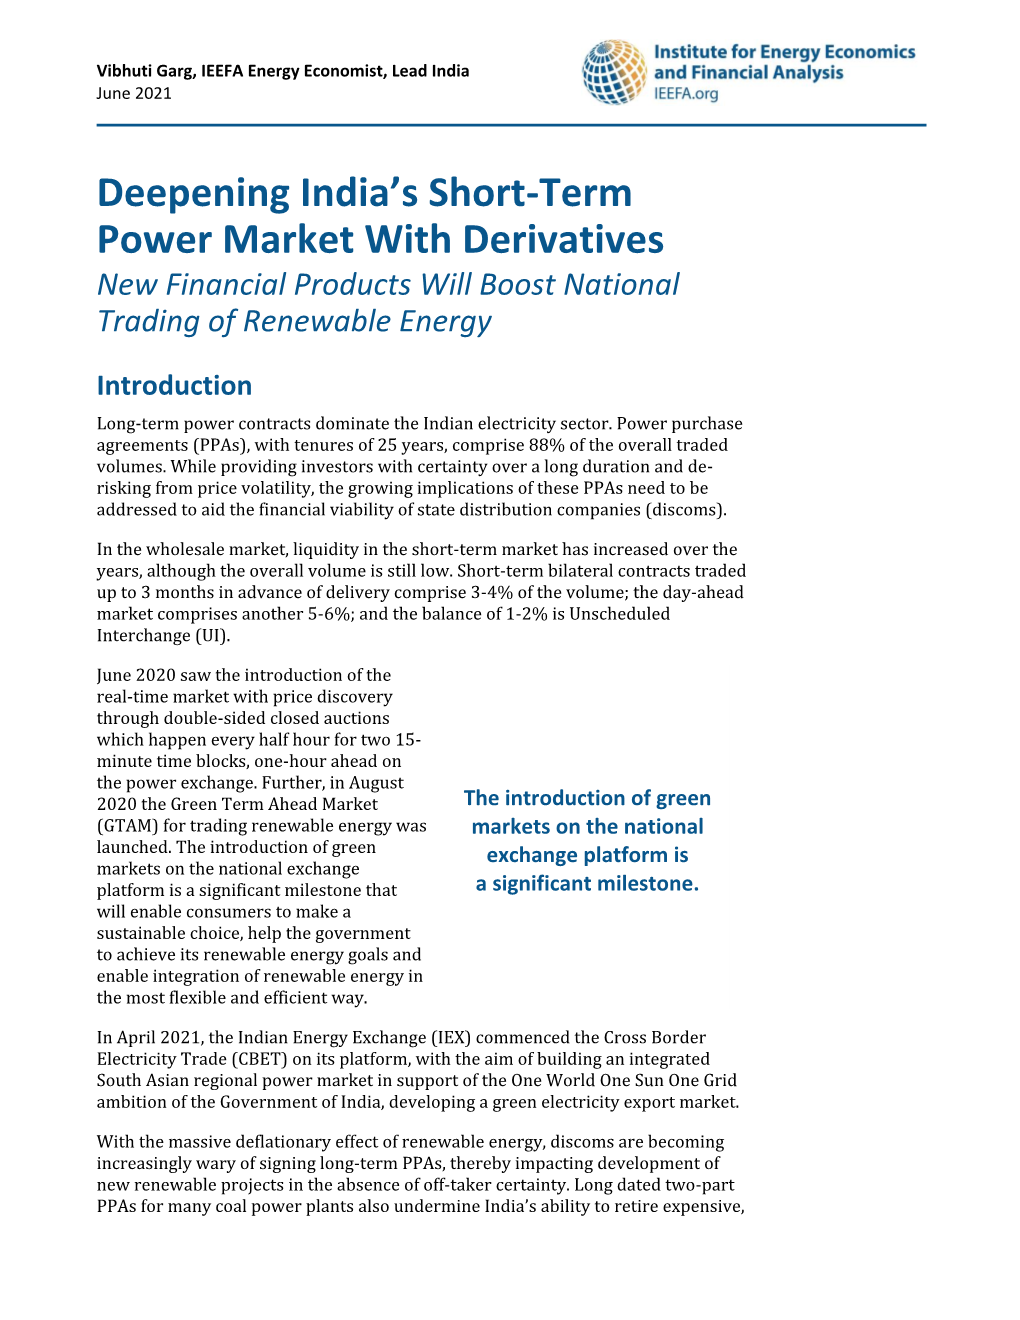 Deepening India's Short-Term Power Market with Derivatives 2